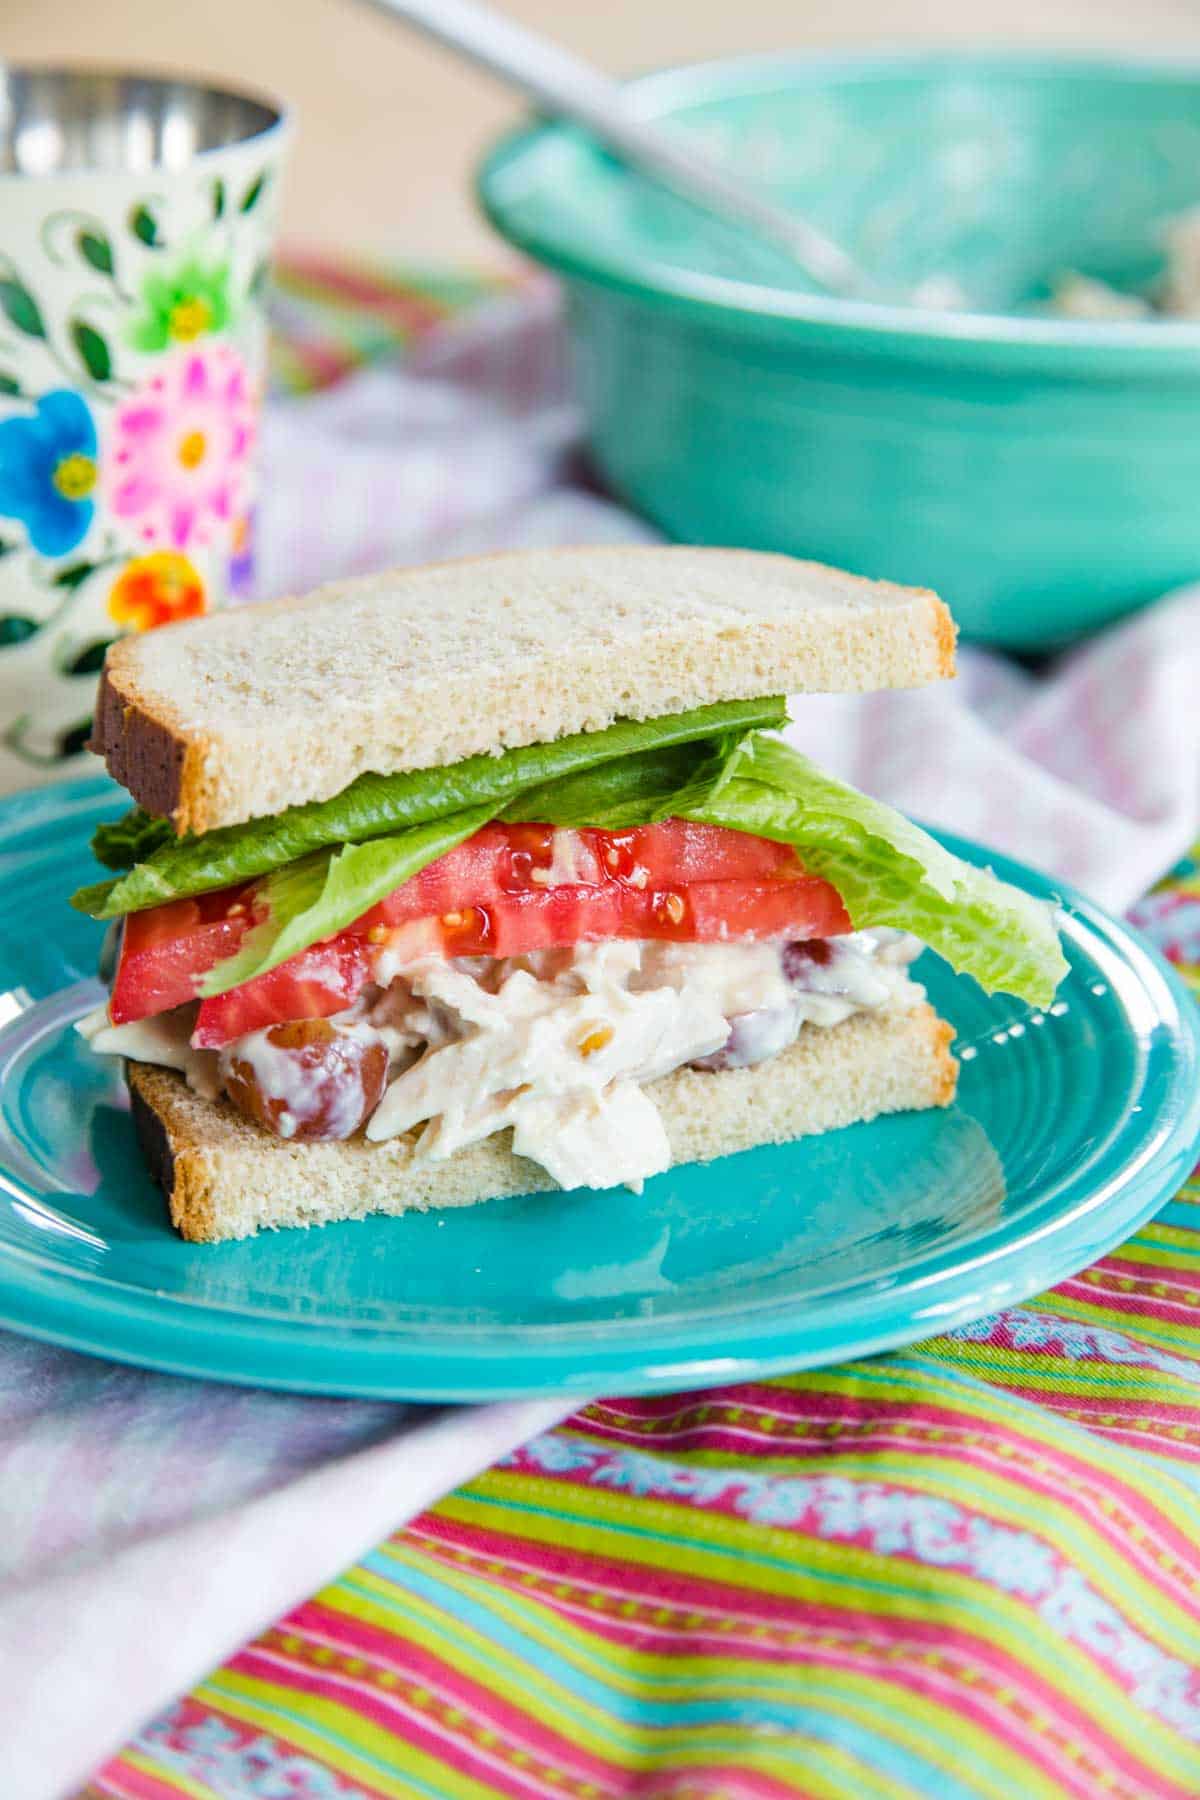 A chicken salad sandwich with lettuce and tomato on a turquoise plate on top of cloth napkins.